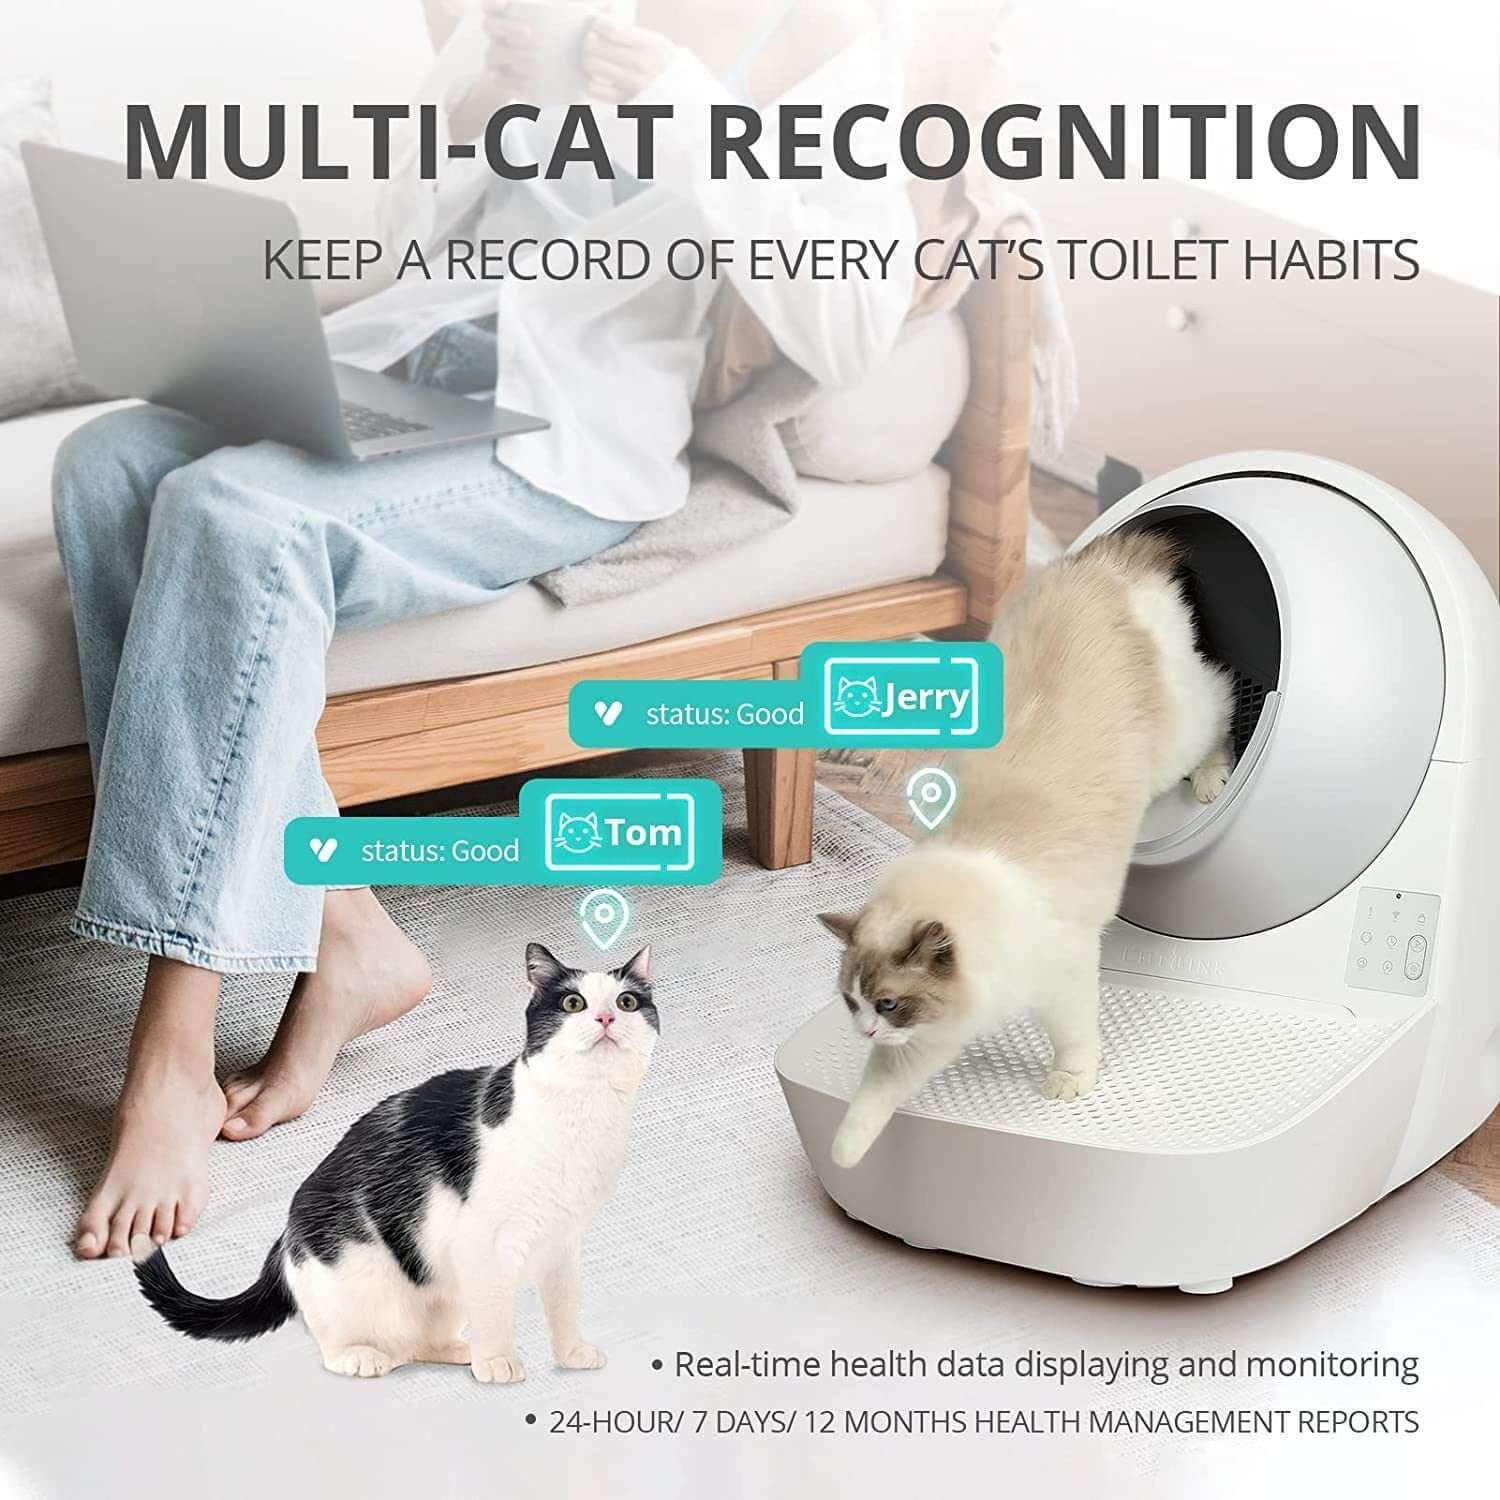 automatic self-cleaning cat litter box a must have for every cat owner